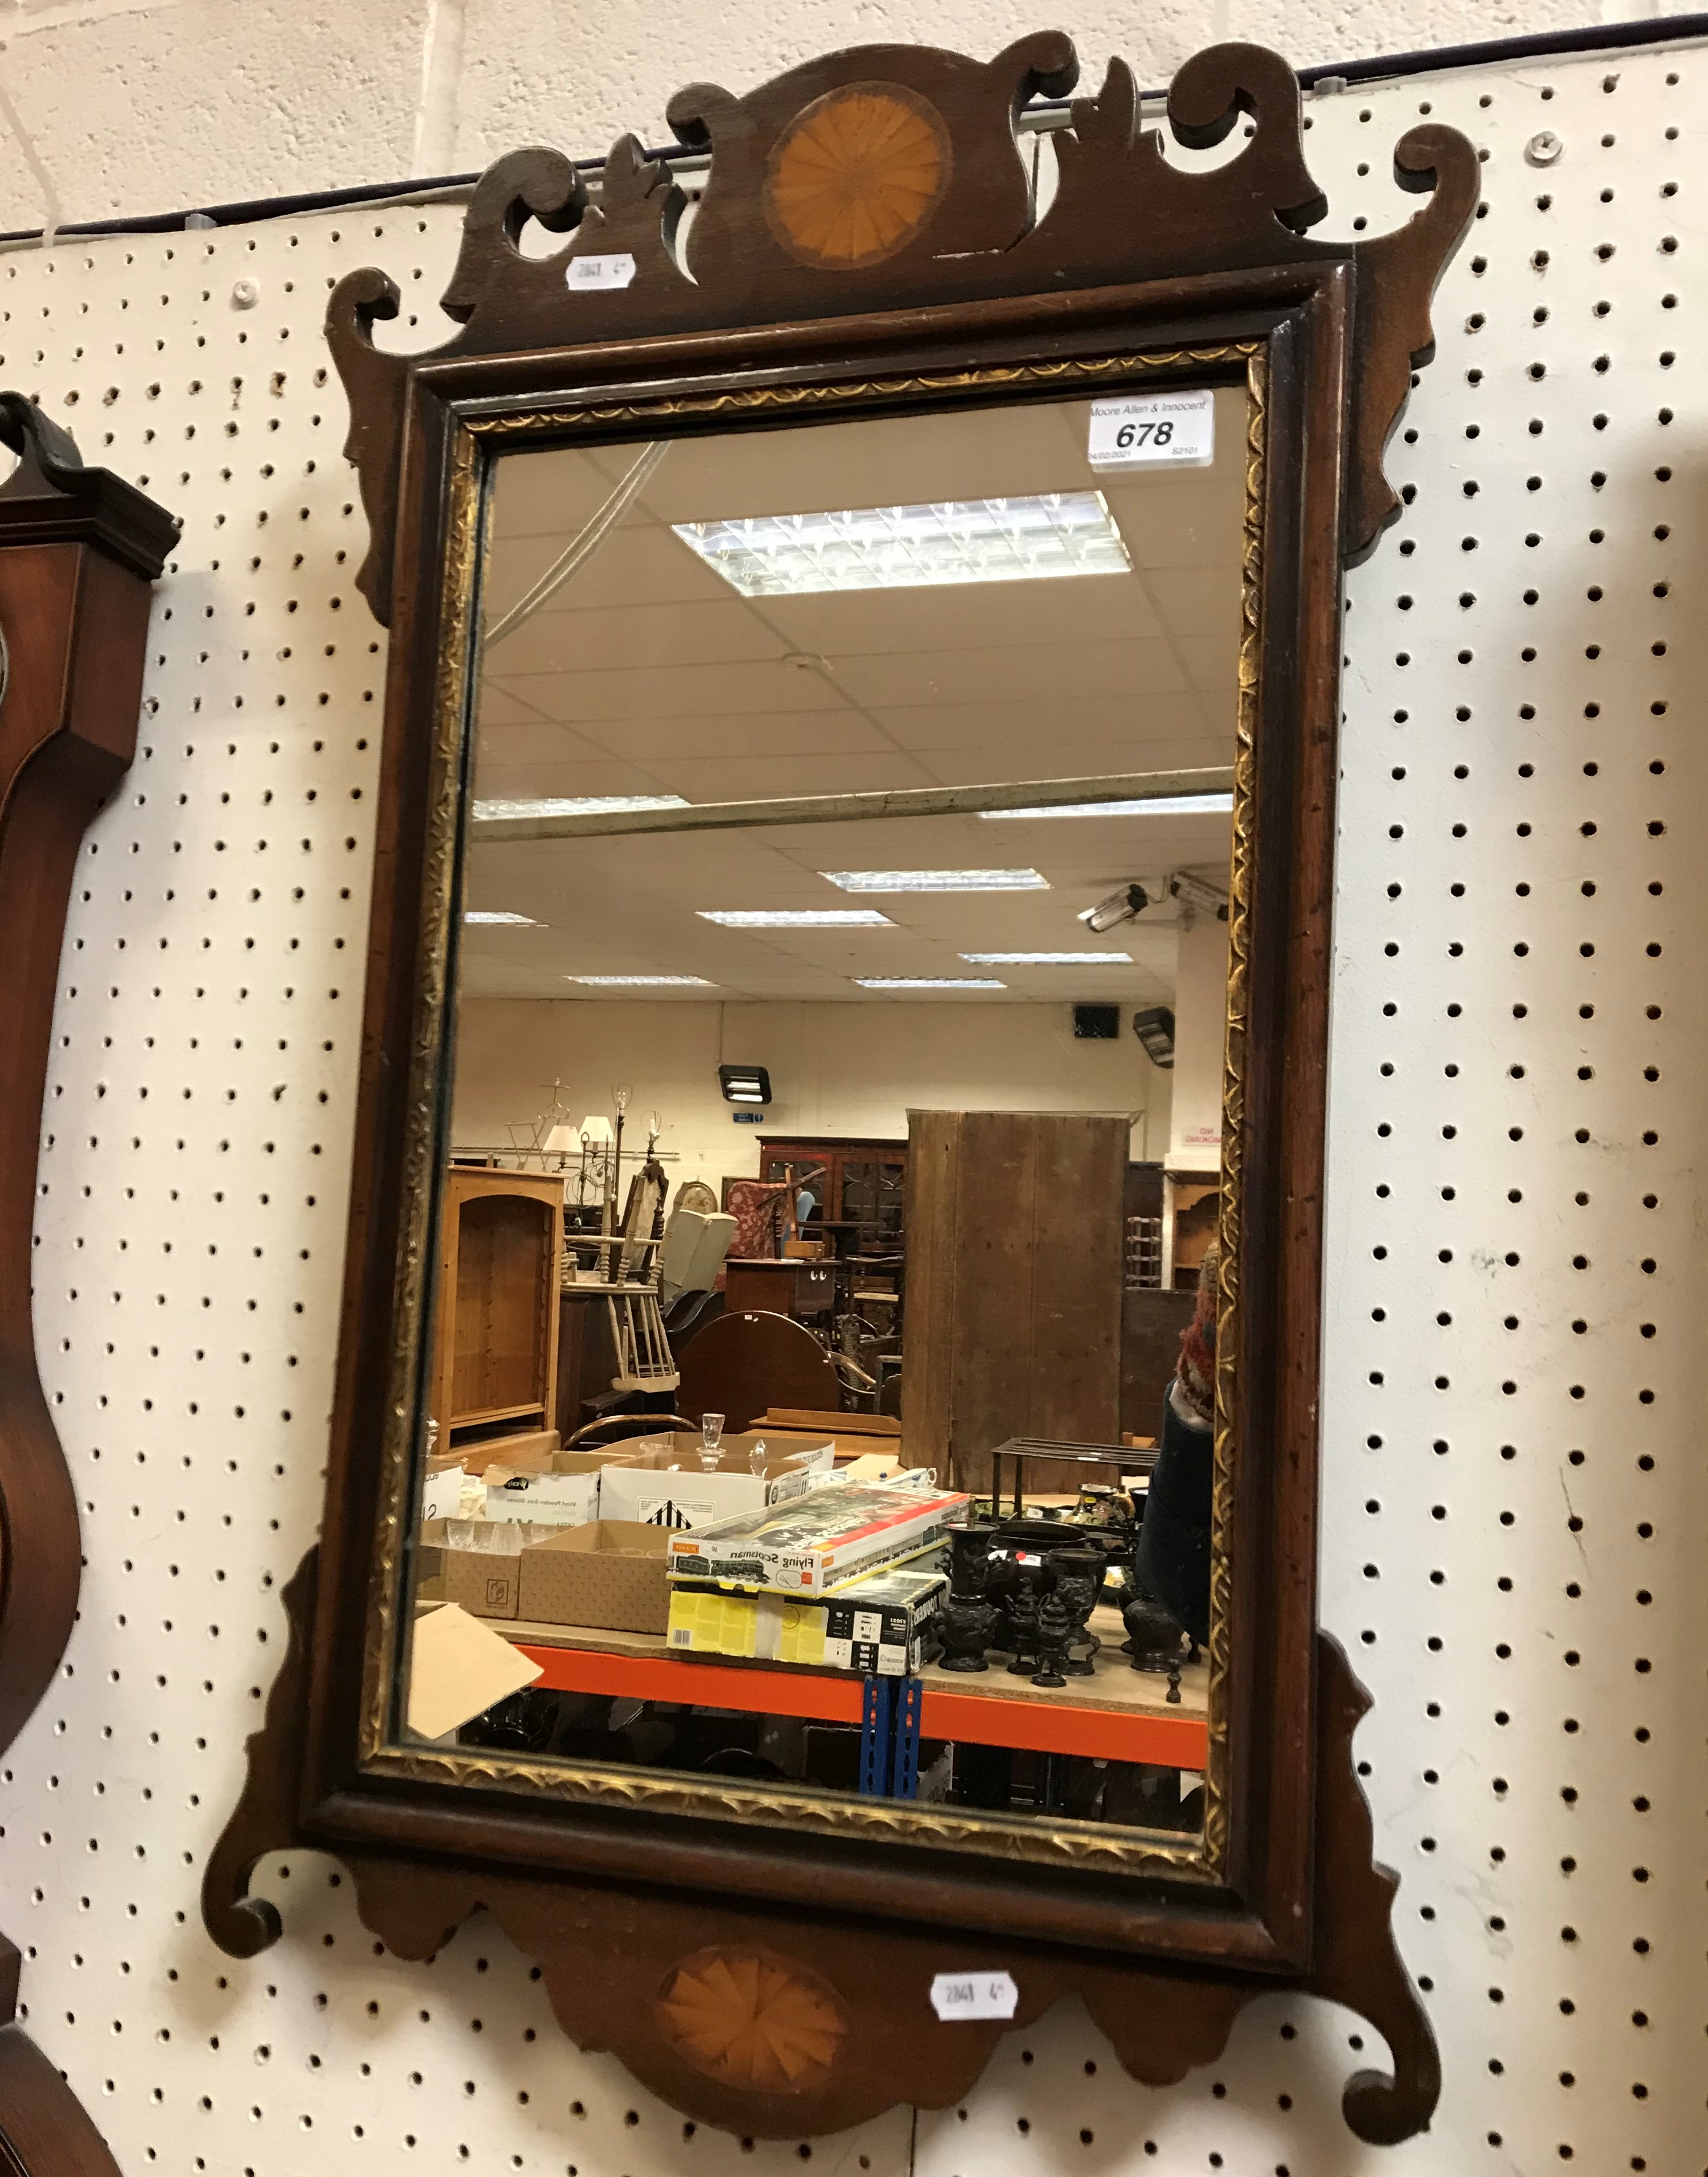 A 19th Century mahogany and inlaid wall mirror with fan decoration,